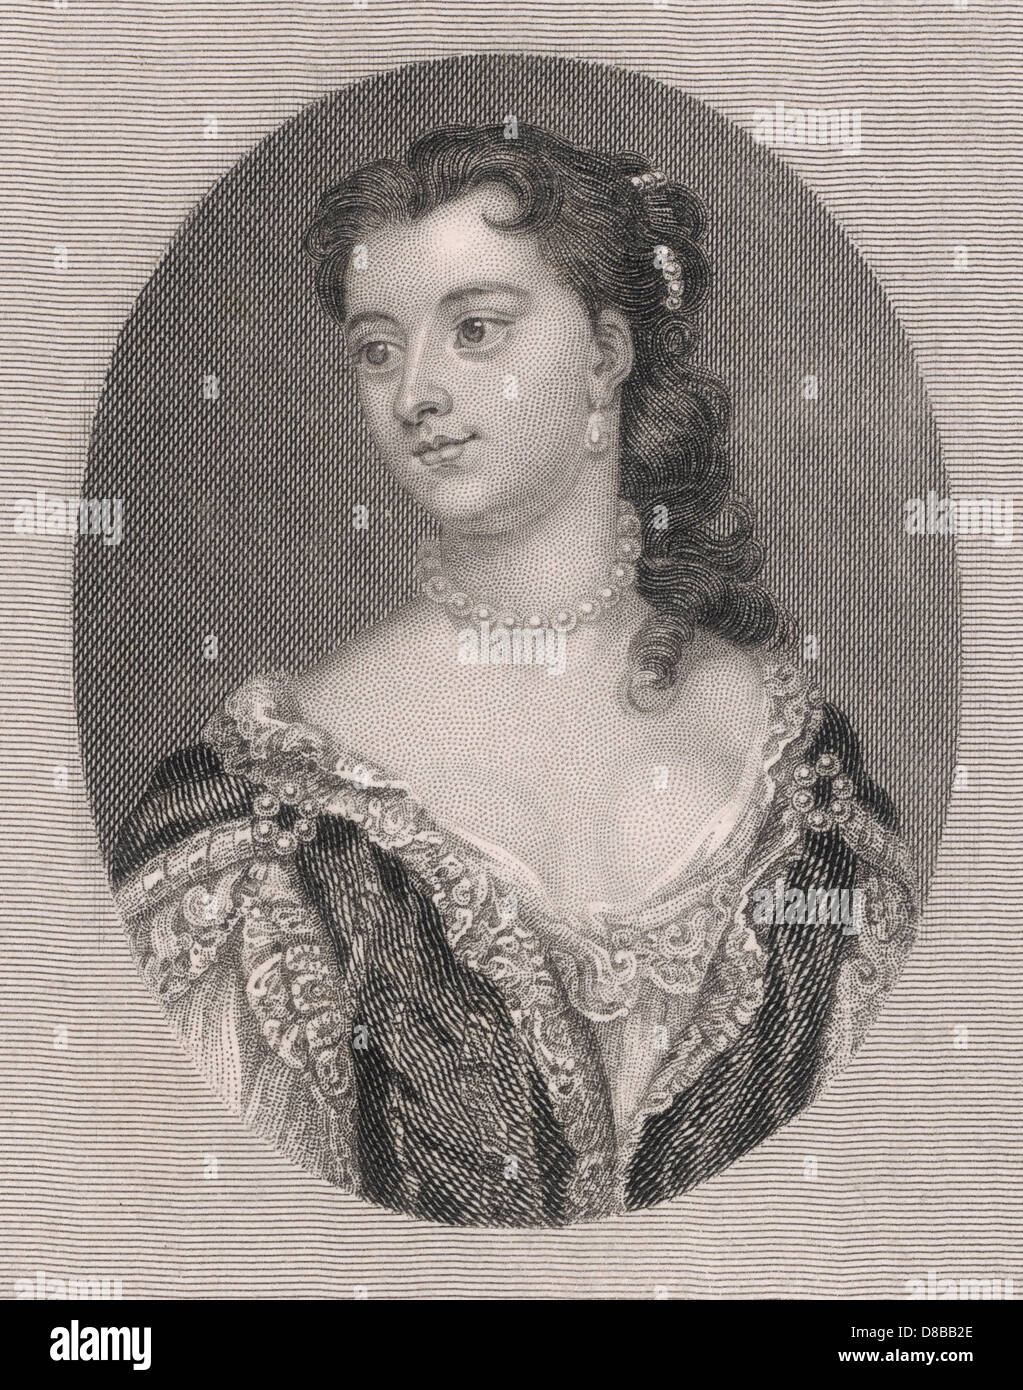 MARY WORTLEY MONTAGU Banque D'Images